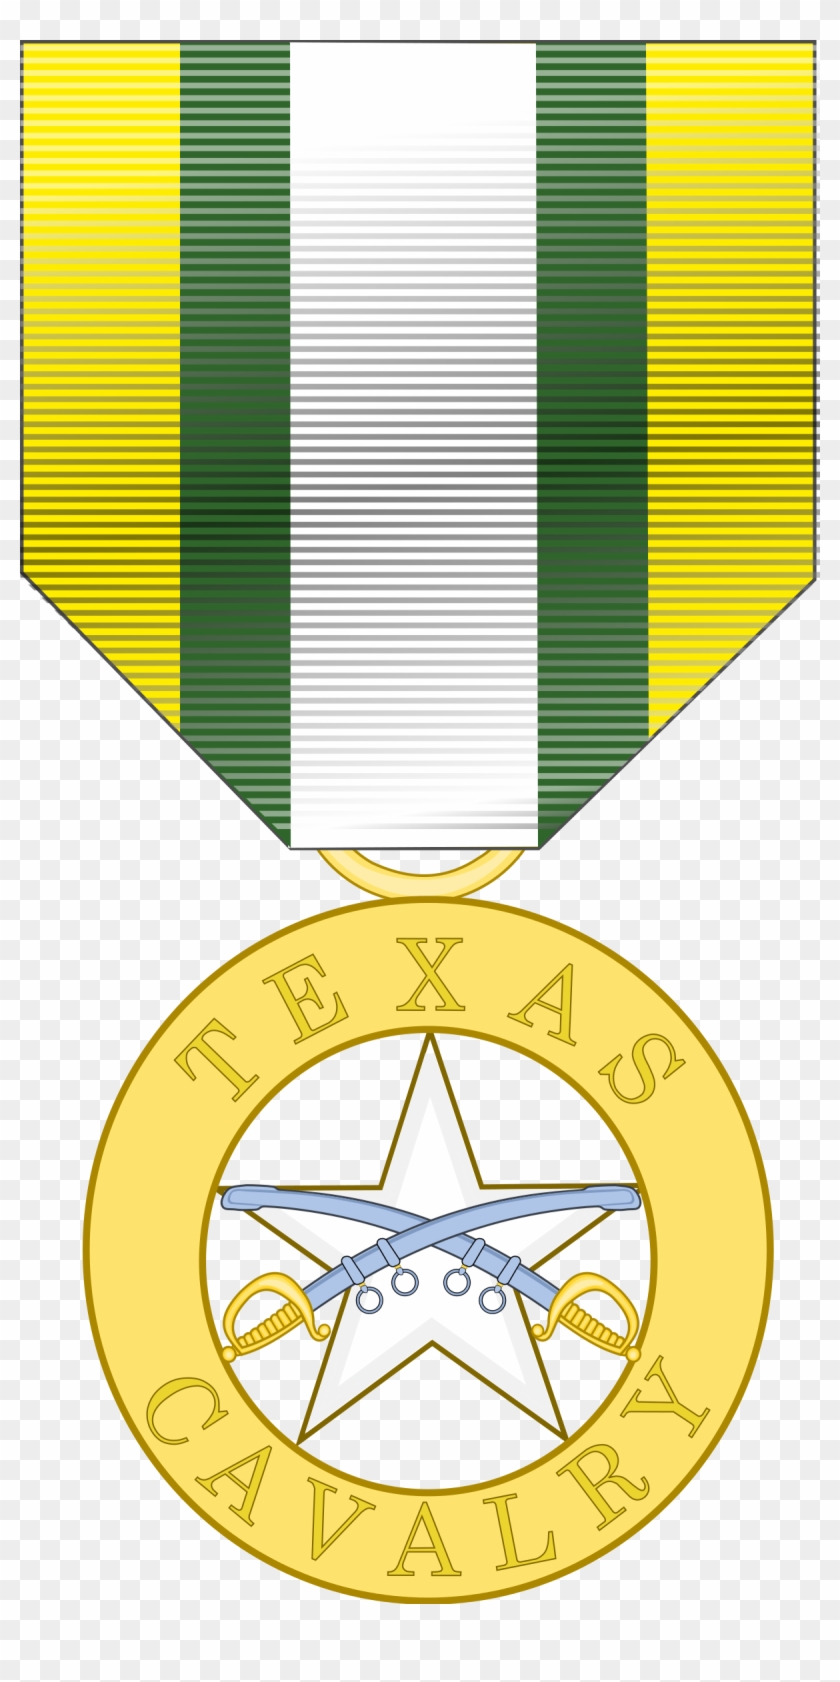 Texas Cavalry Service Medal - Texas Medals And Orders Clipart